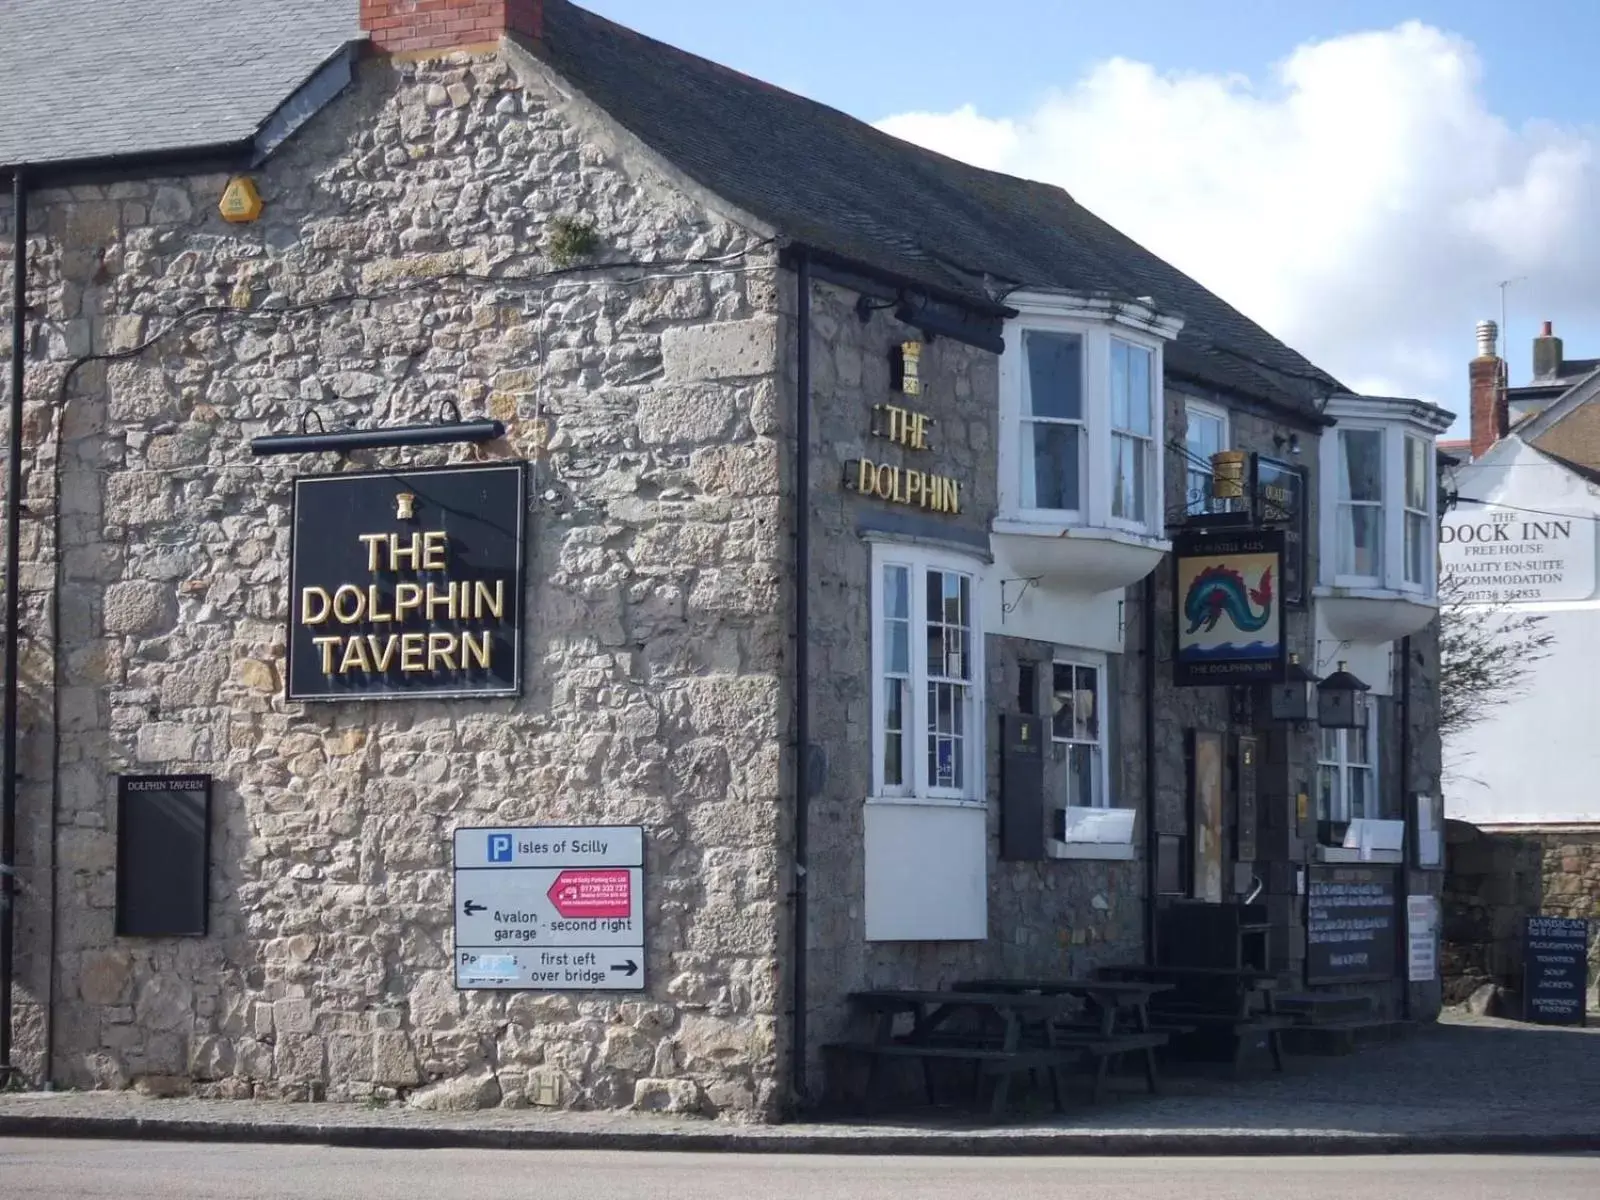 Property Building in The Dolphin Tavern